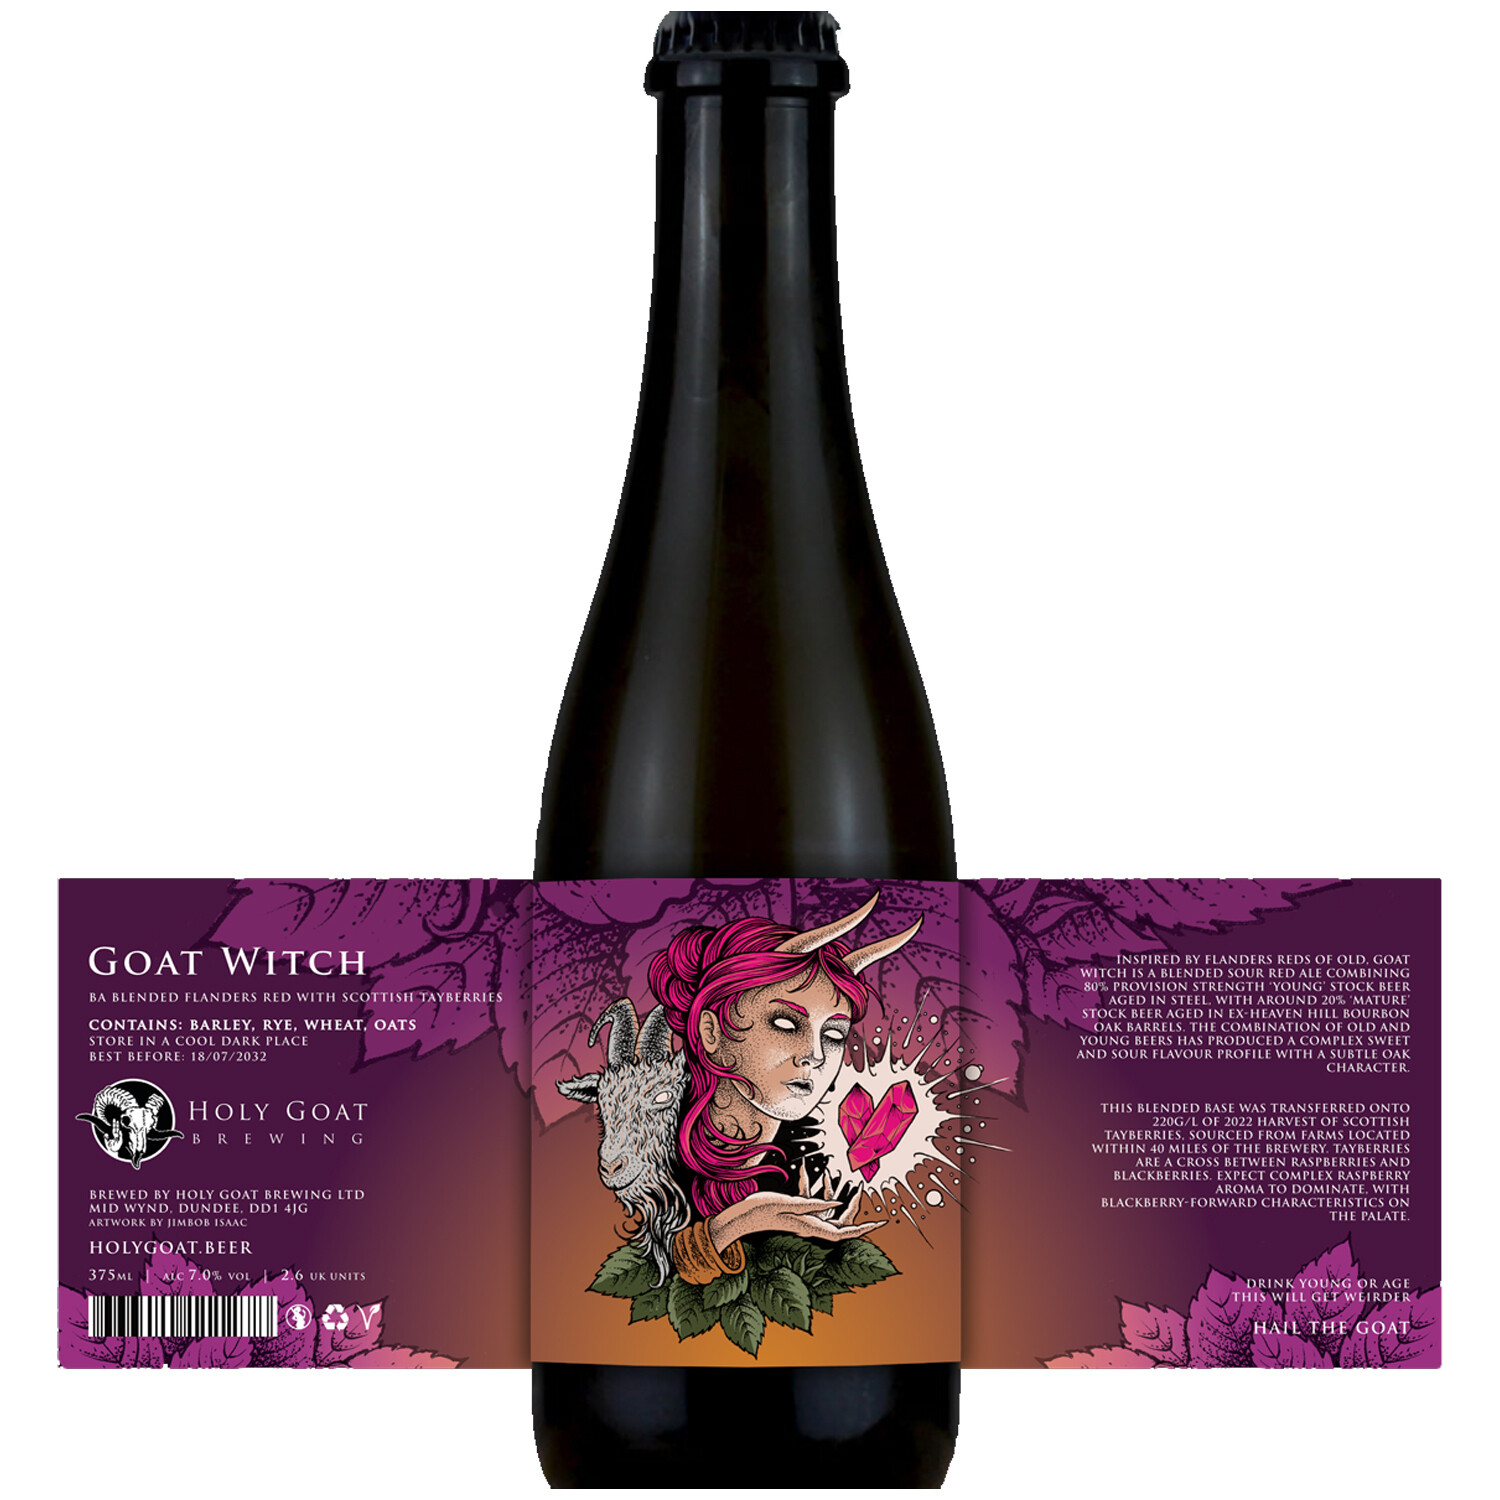 Holy Goat Goat Witch BA Blended Flanders Red